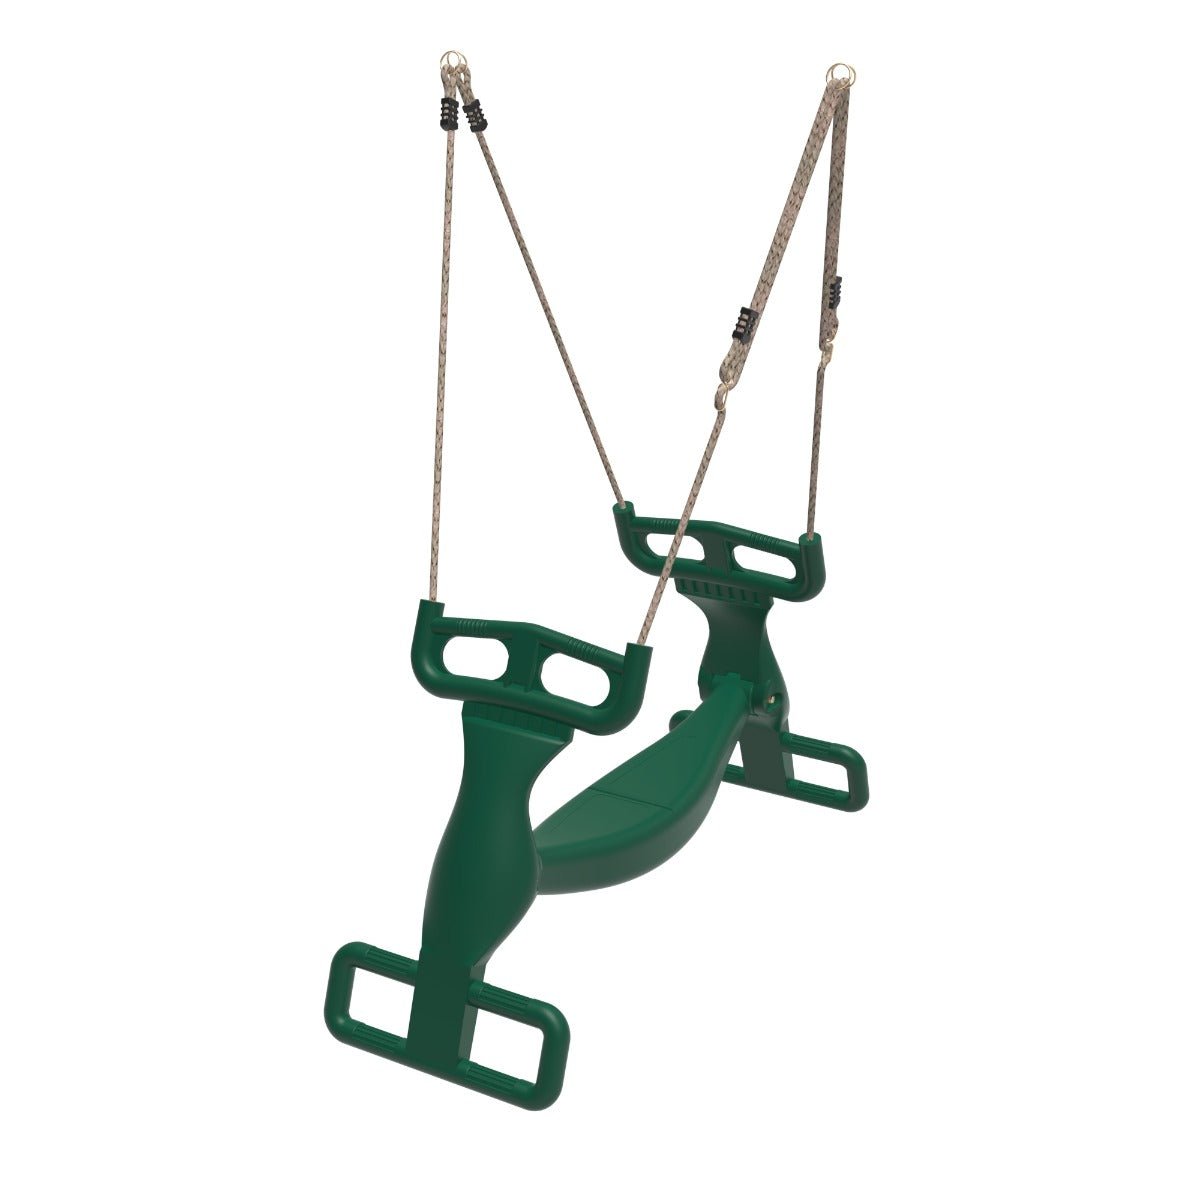 Rebo Moulded Plastic Tandem Glider Two Child Swing Seat - Green